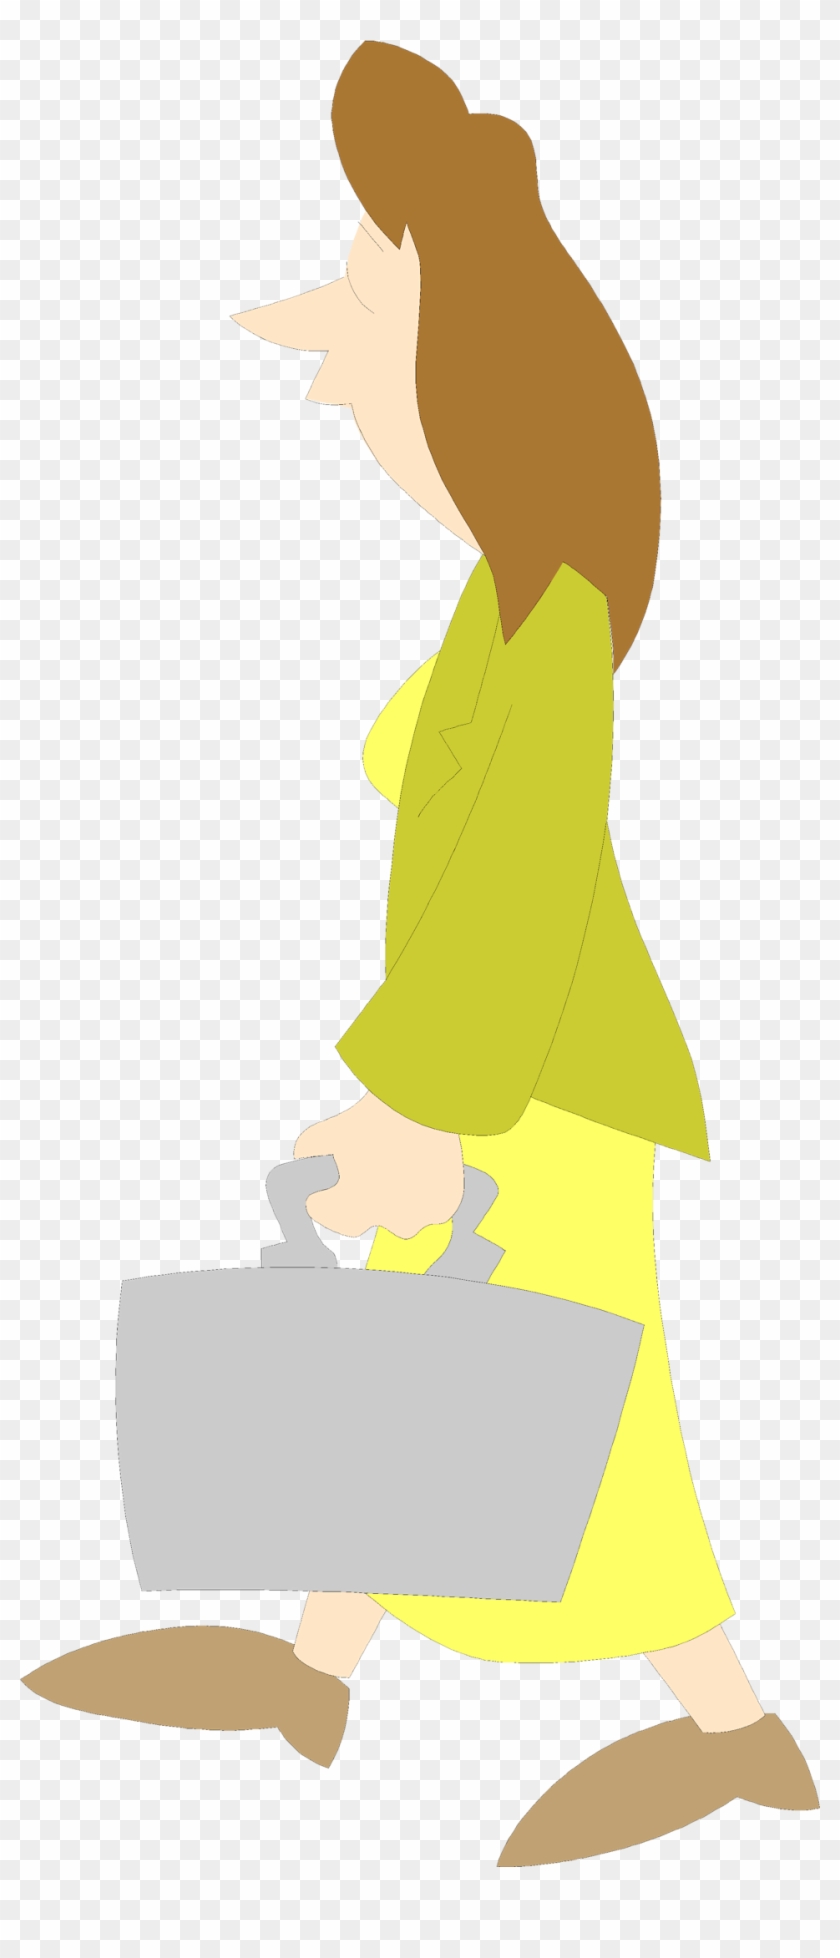 Illustration Of A Business Woman Carrying A Briefcase - Illustration Clipart #4413780